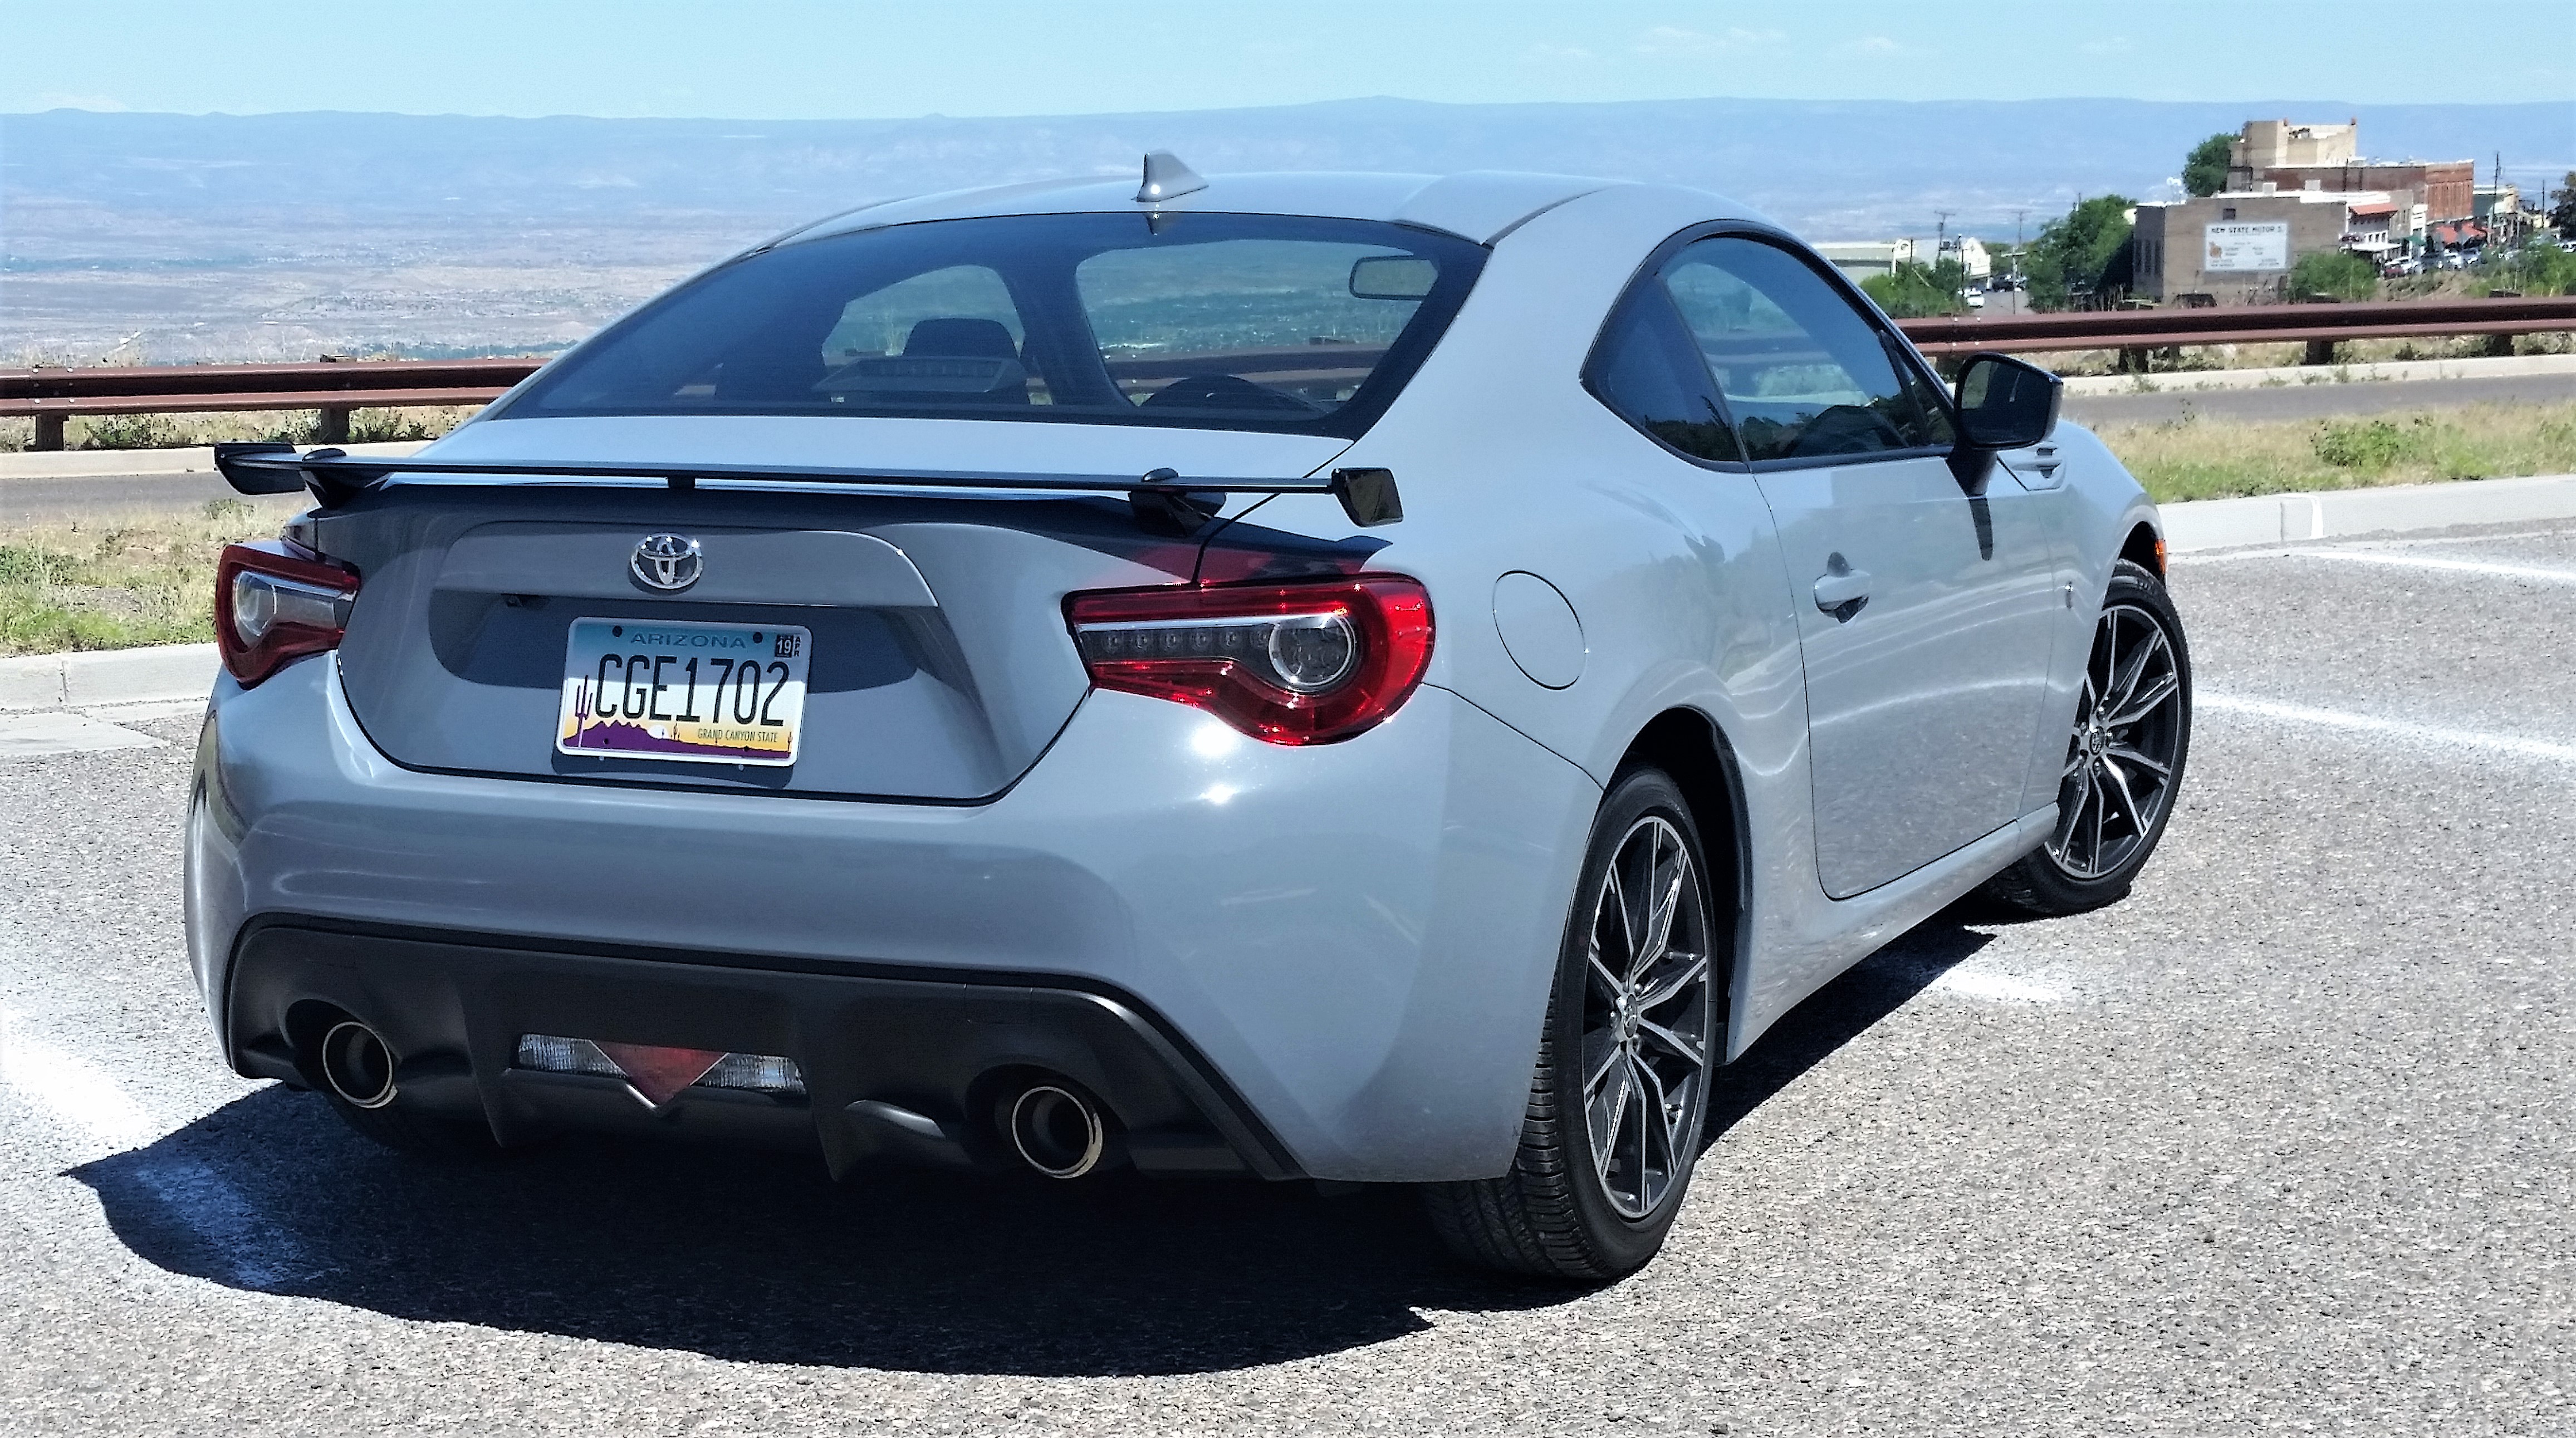 Jerome, The winding road to old Jerome in the 2018 Toyota 86 coupe, ClassicCars.com Journal